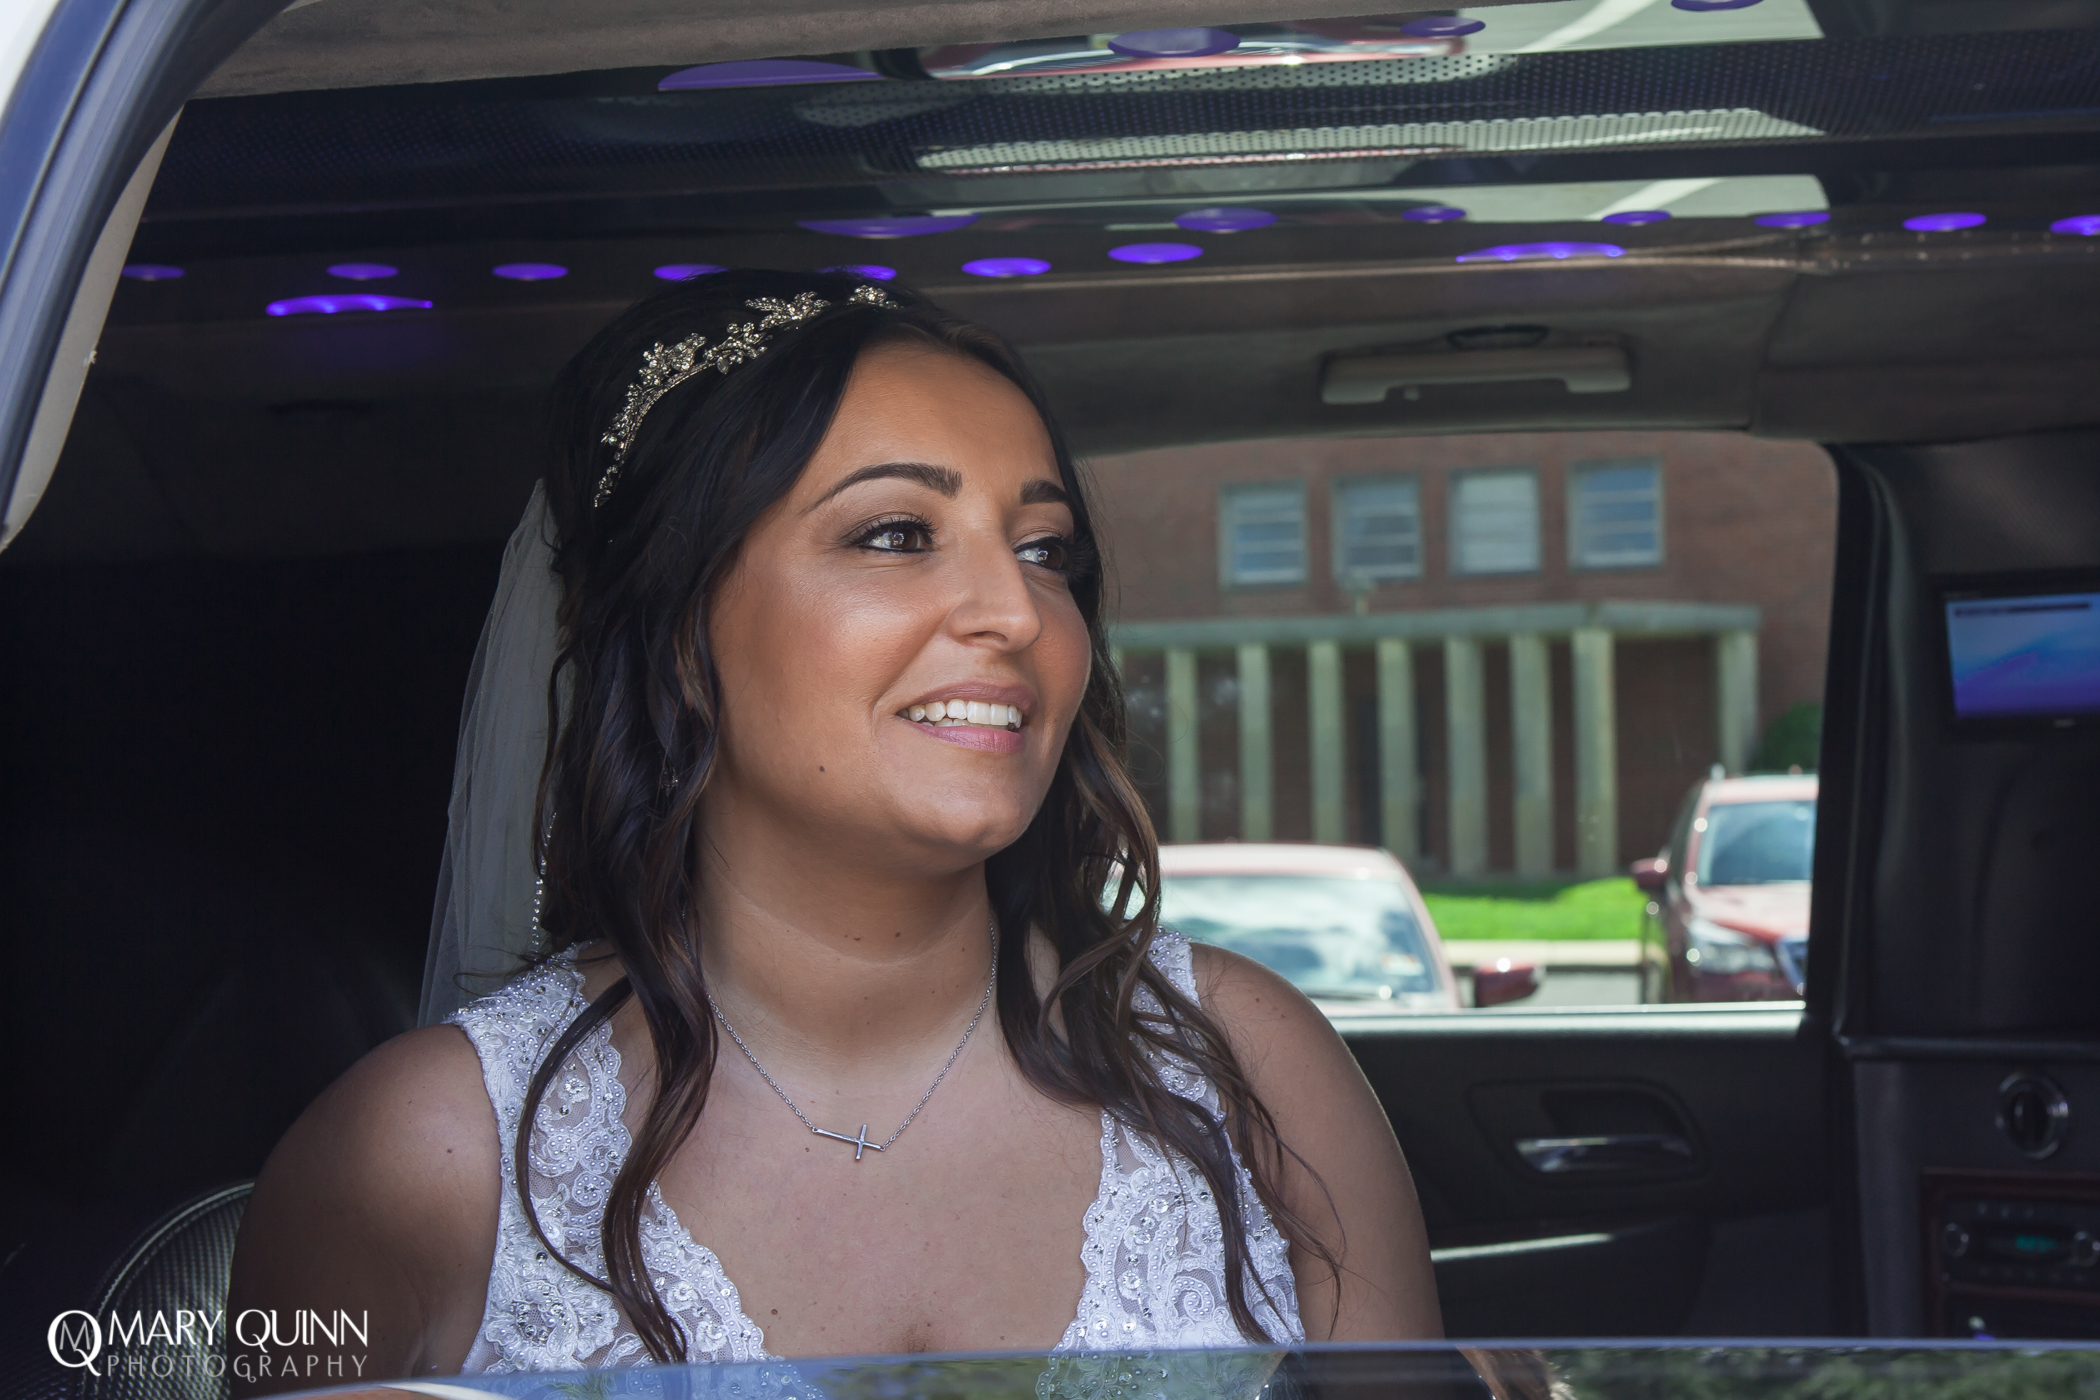 Wedding Photographer at the Merion Cinnaminson New Jersey